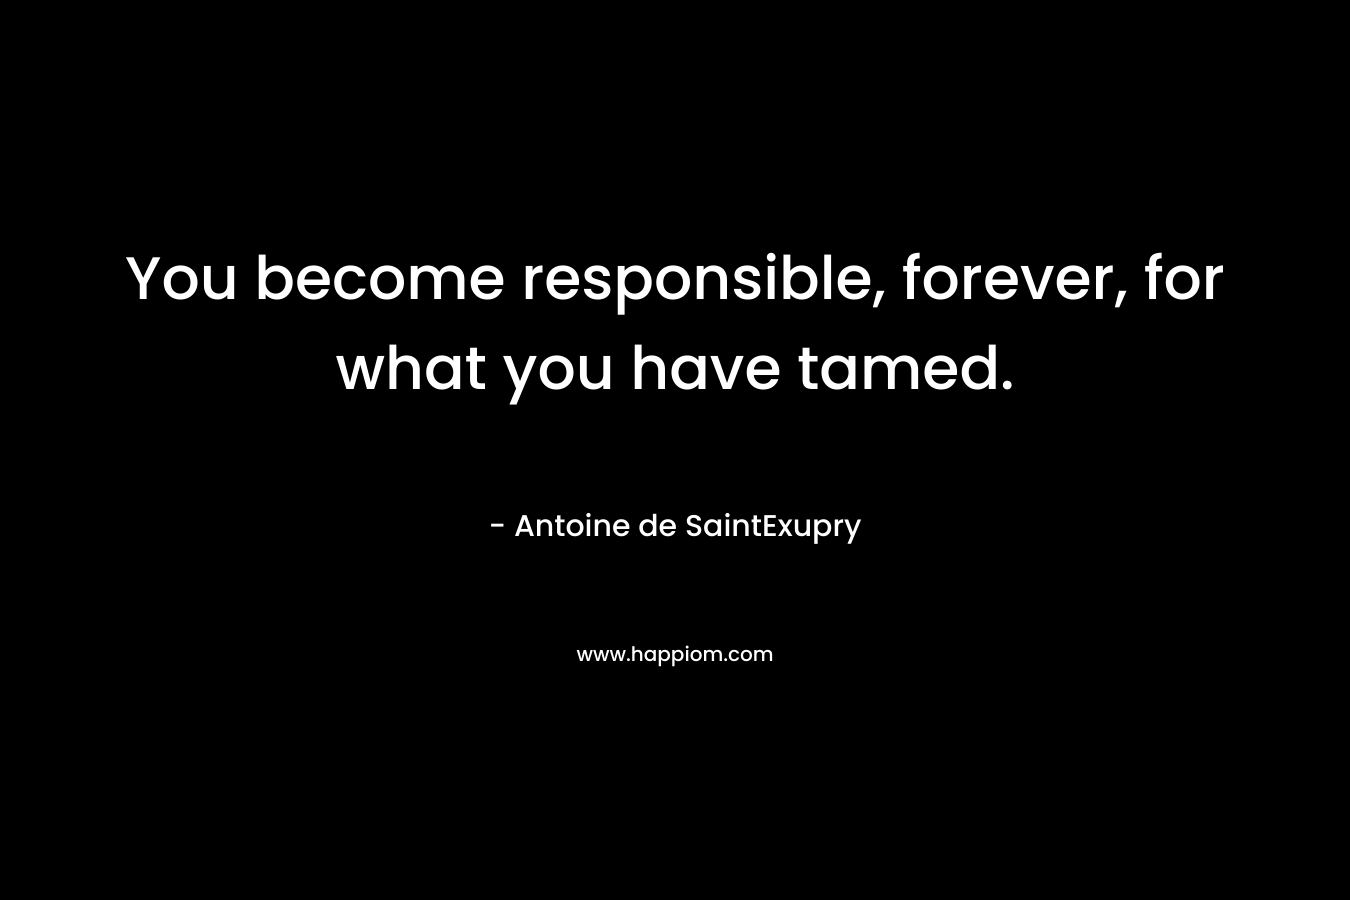 You become responsible, forever, for what you have tamed.